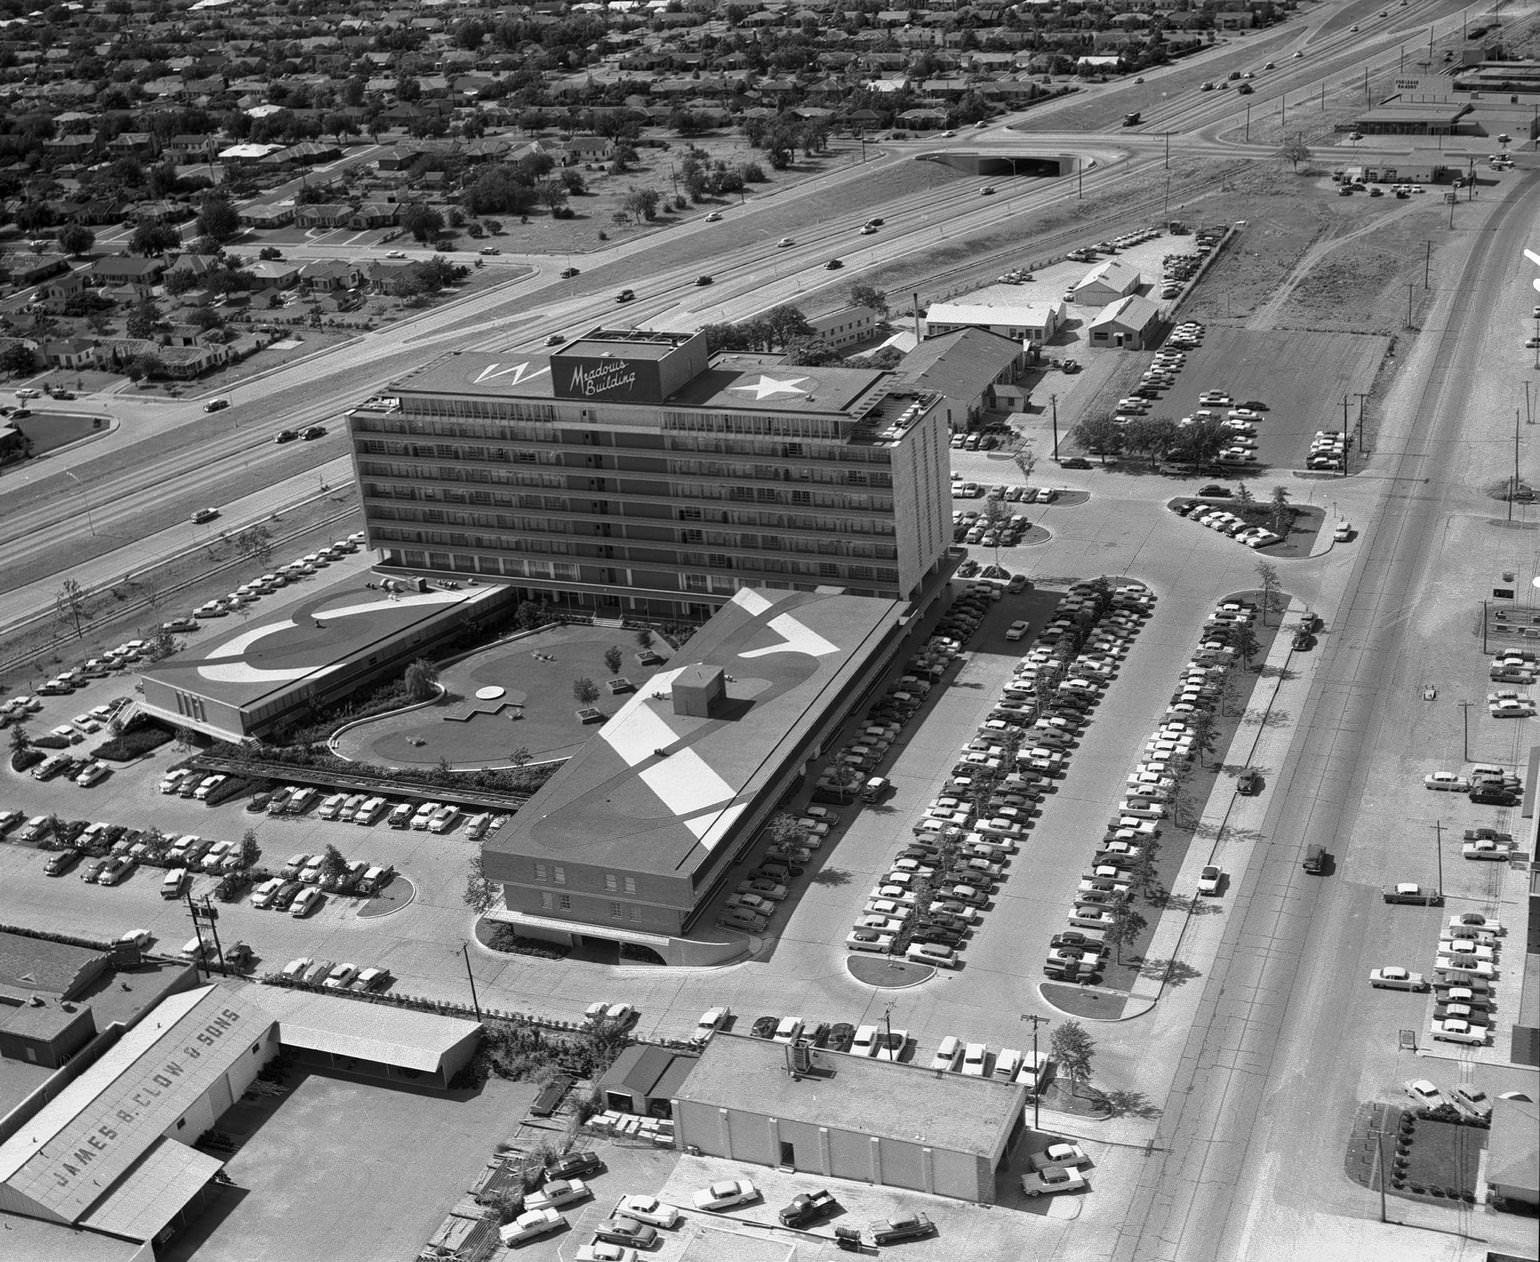 Aerial view of the Meadows building in downtown Dallas, 1956